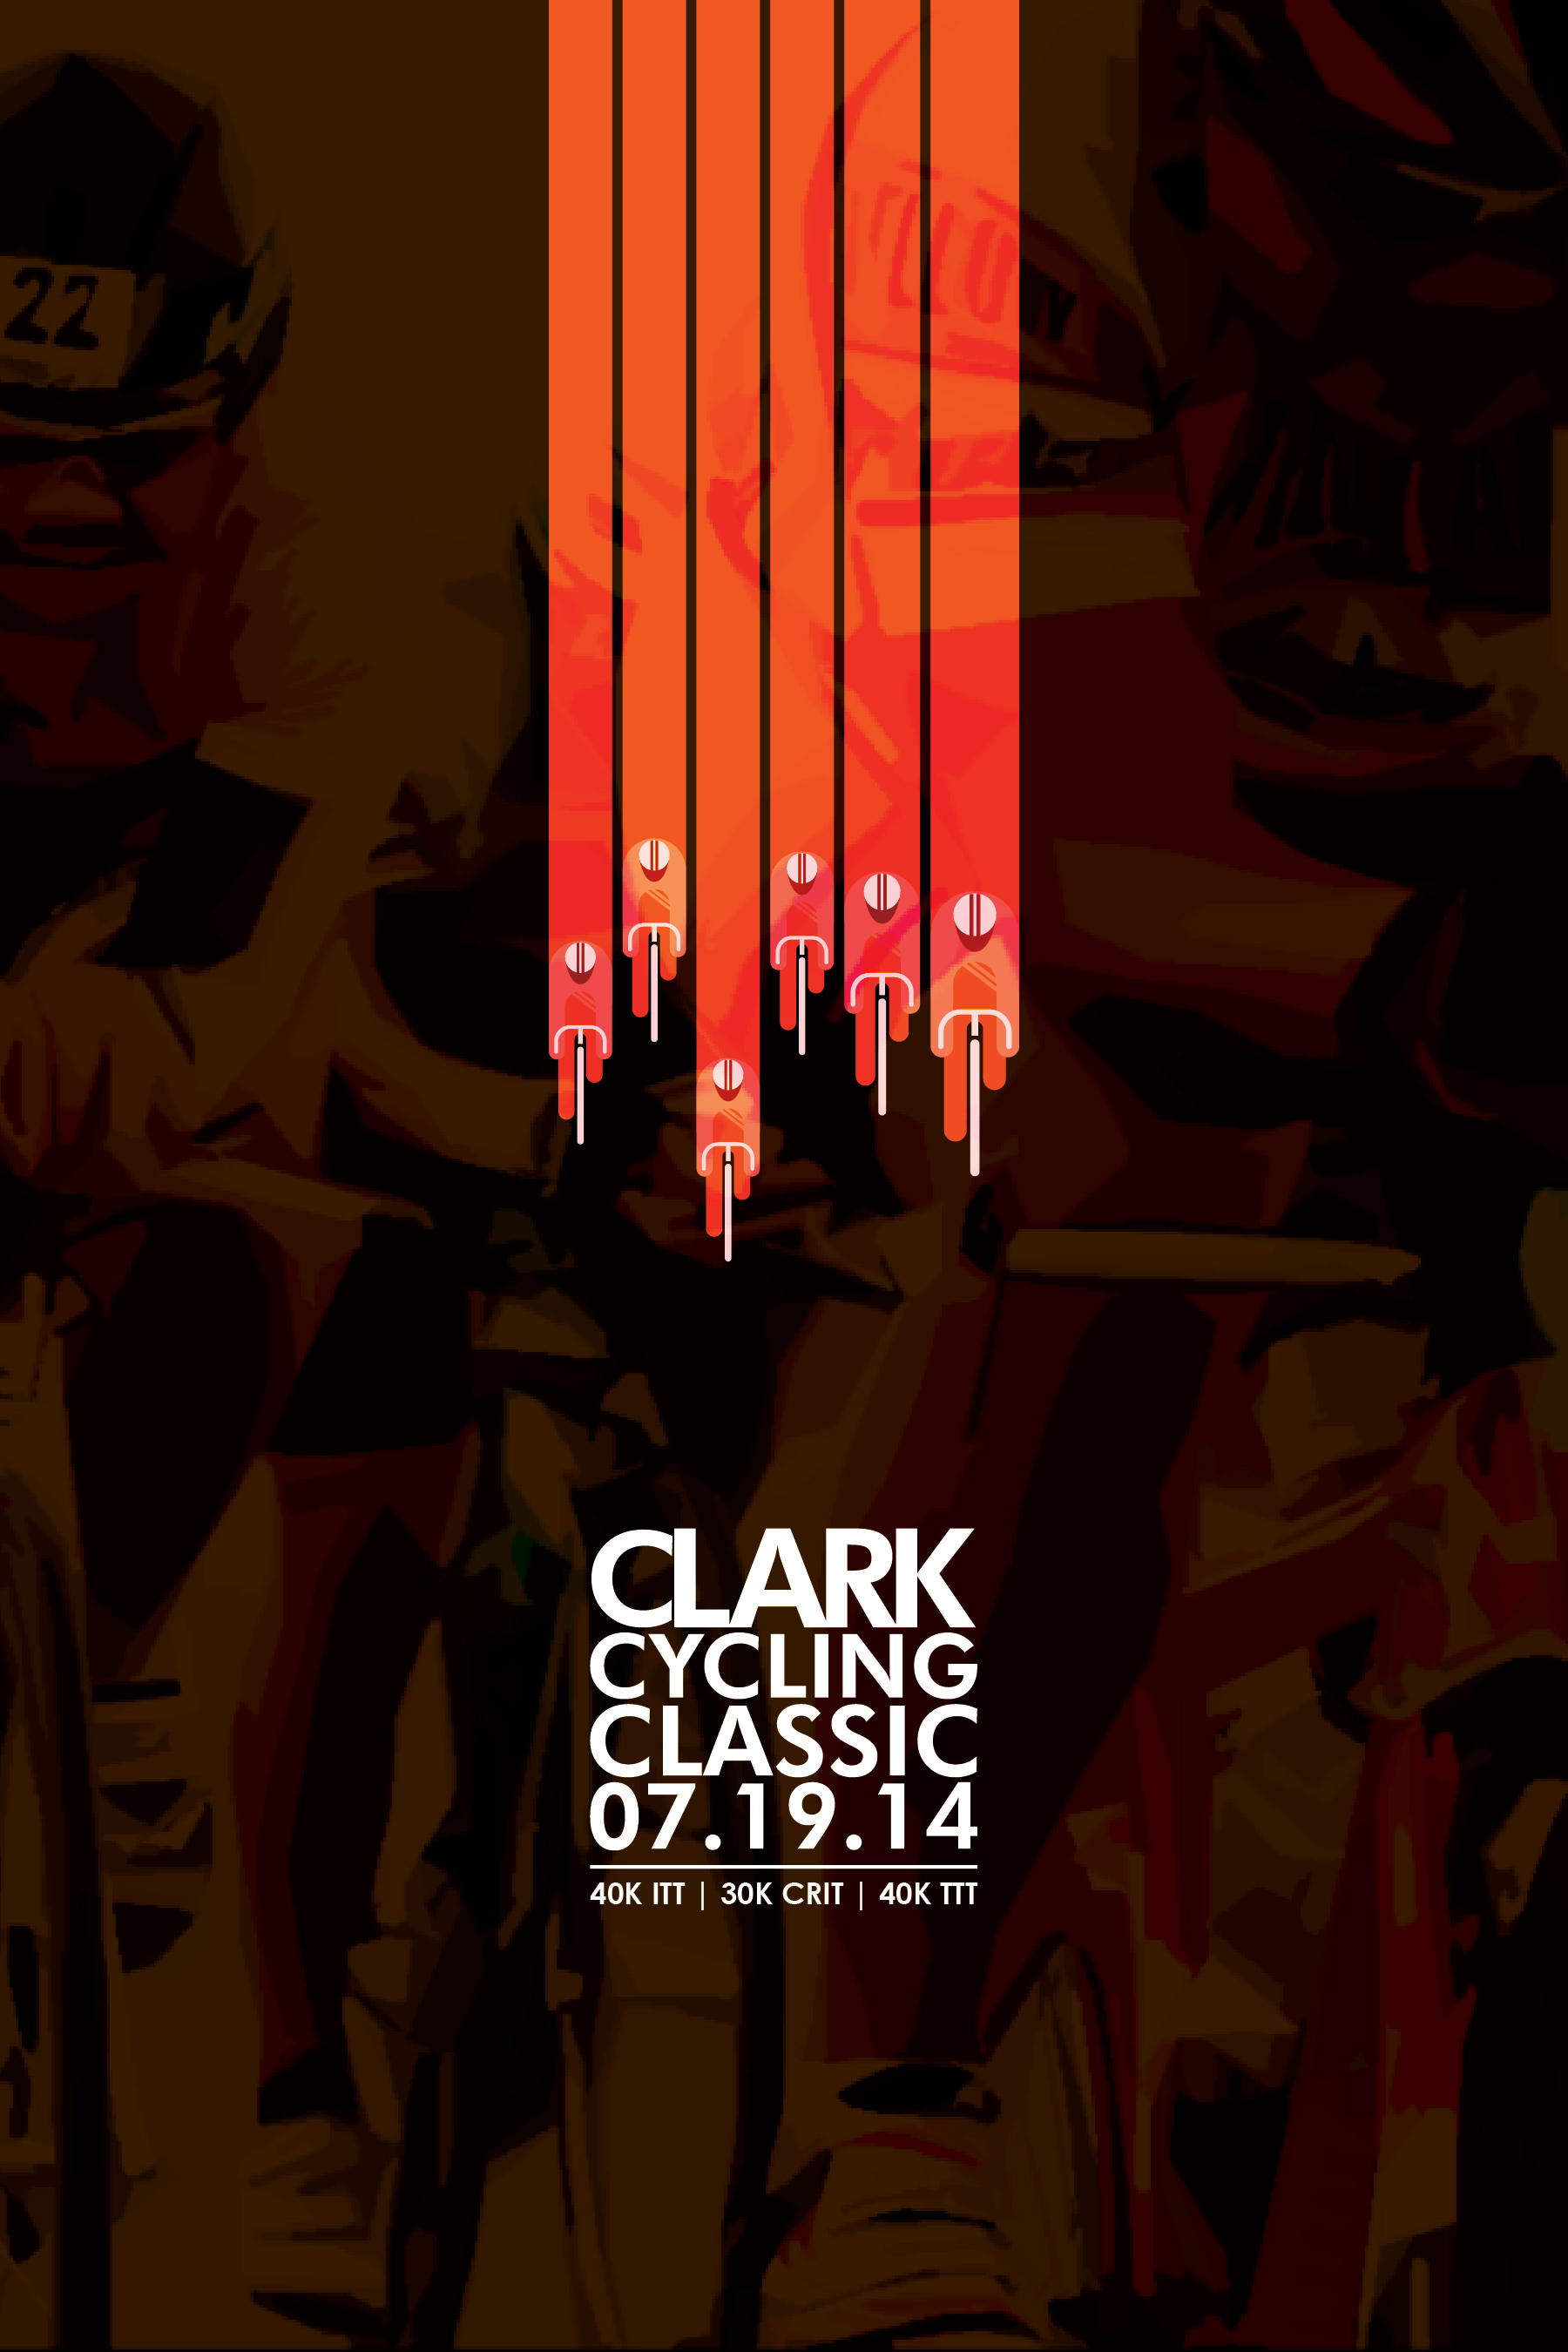 clark-cycling-classic-2014-poster